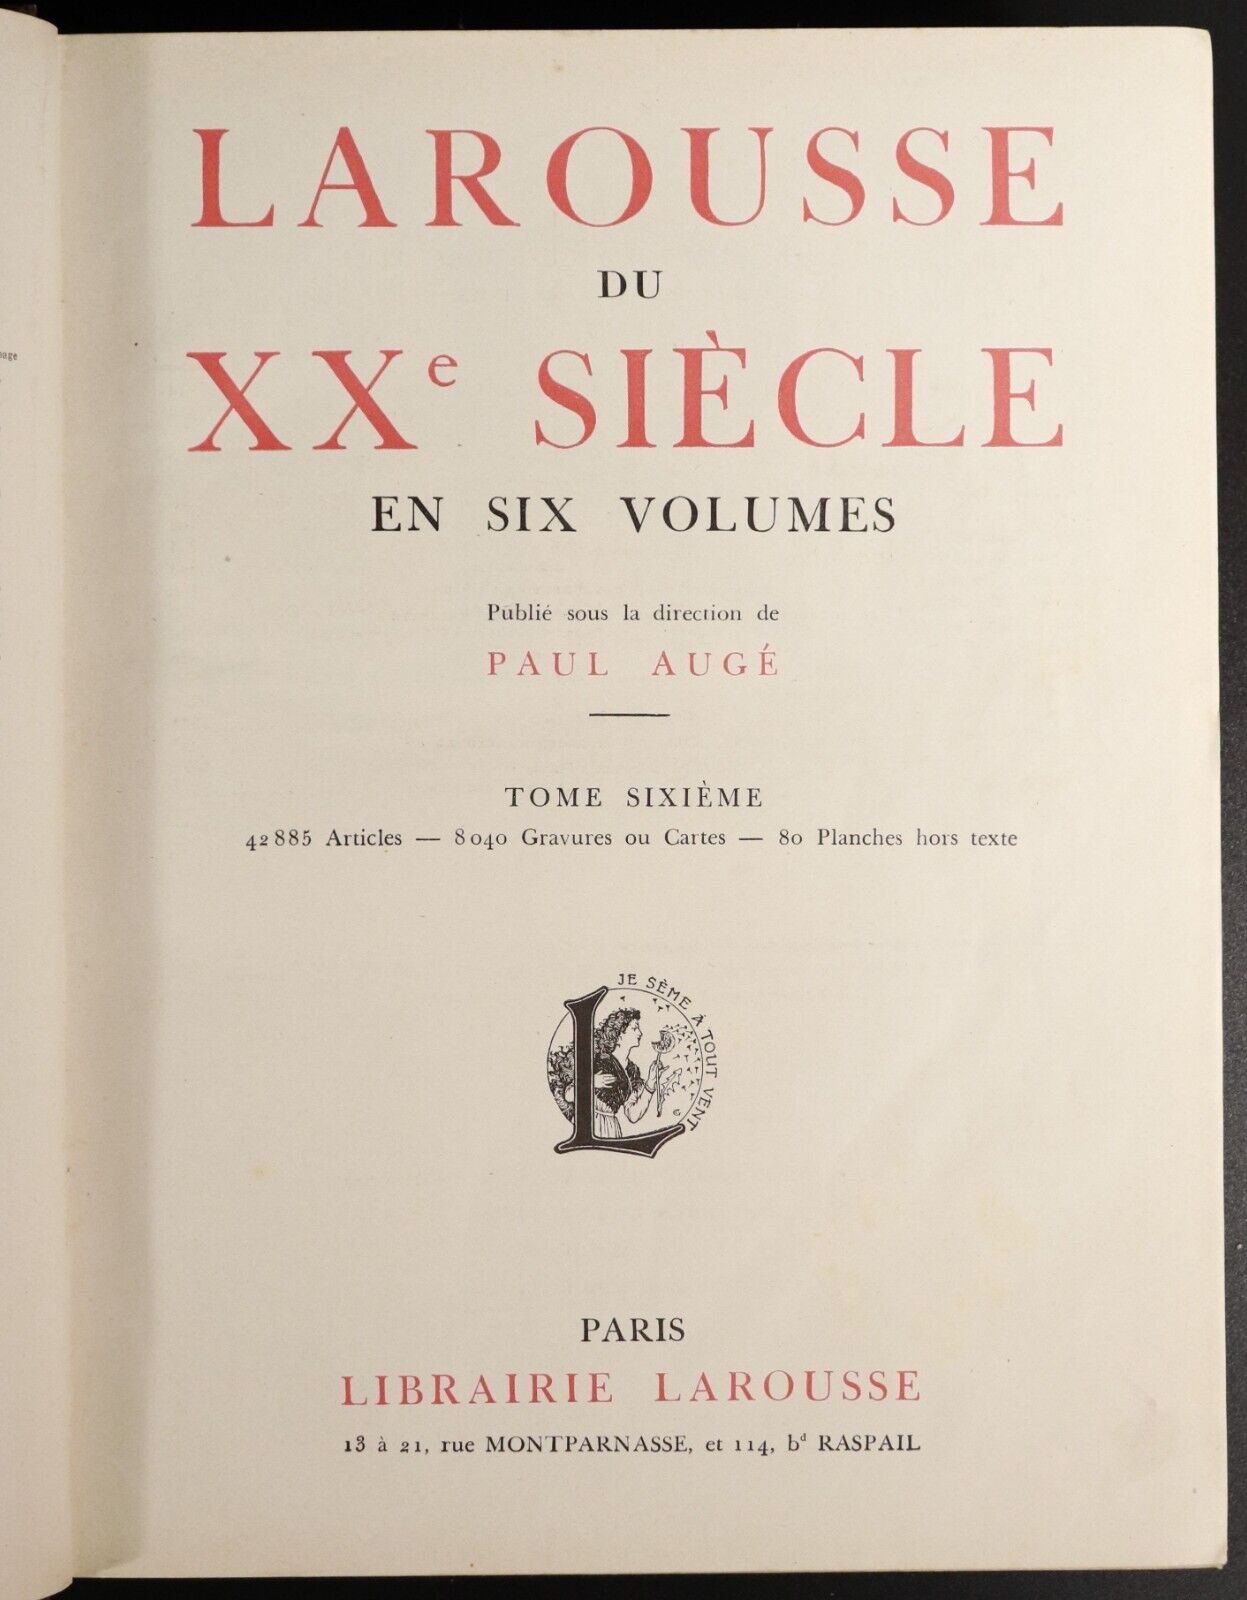 1933 Larousse Du Xxe Siecle Vol.6 by Paul Auge' French Reference Book - 0